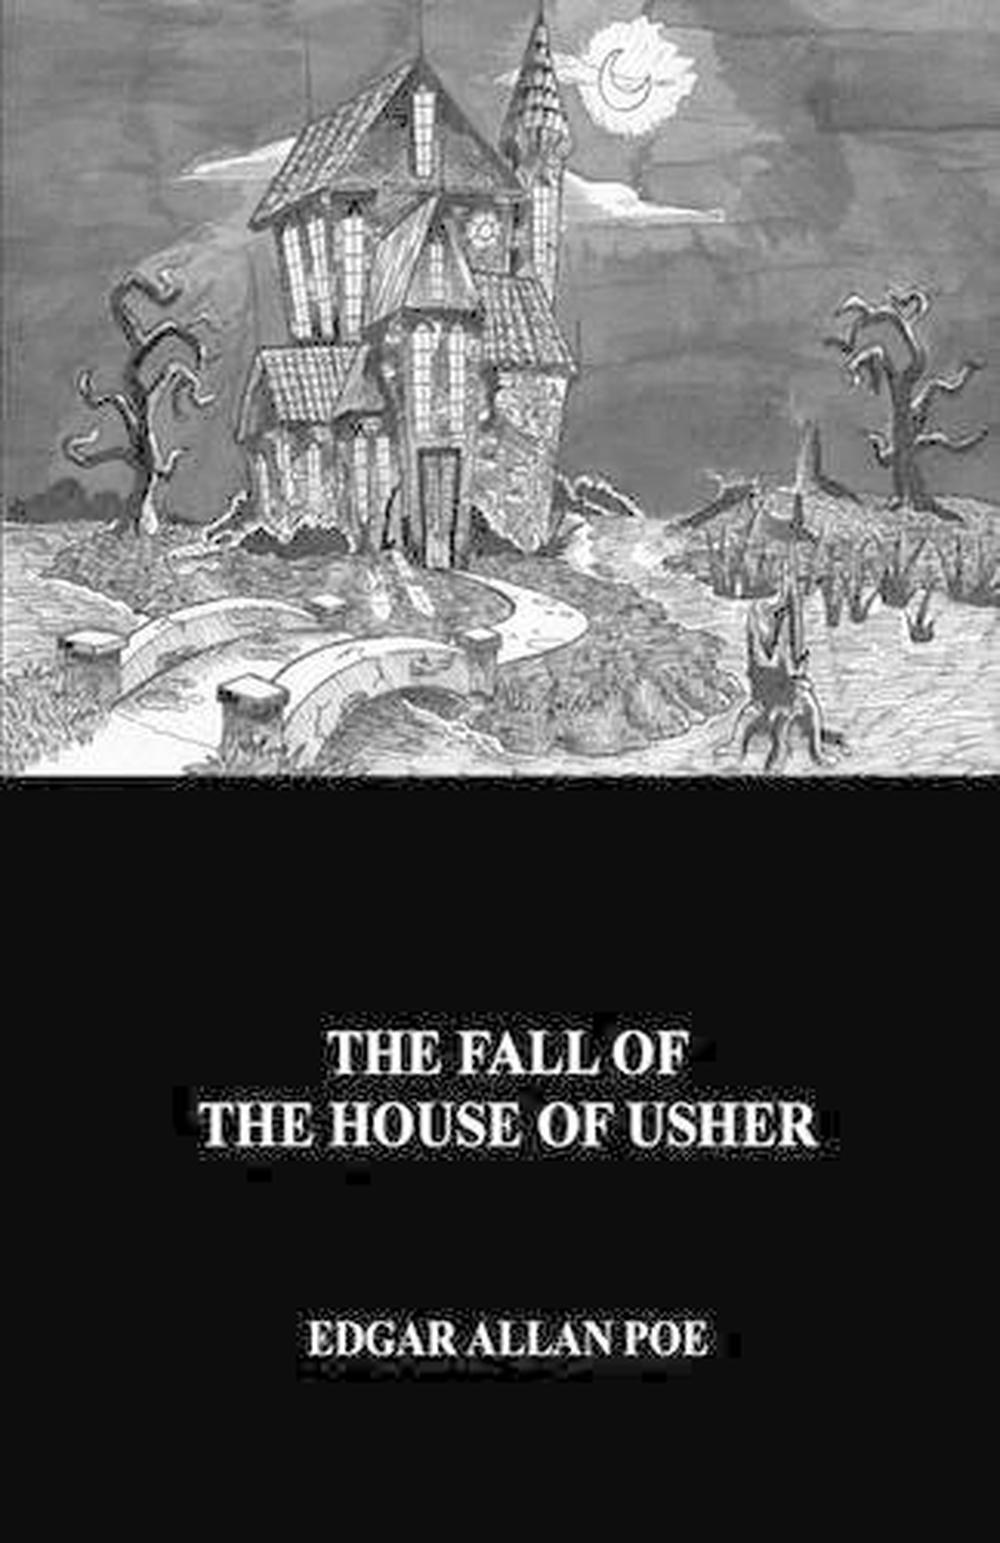 the fall of the house of usher by edgar allan poe